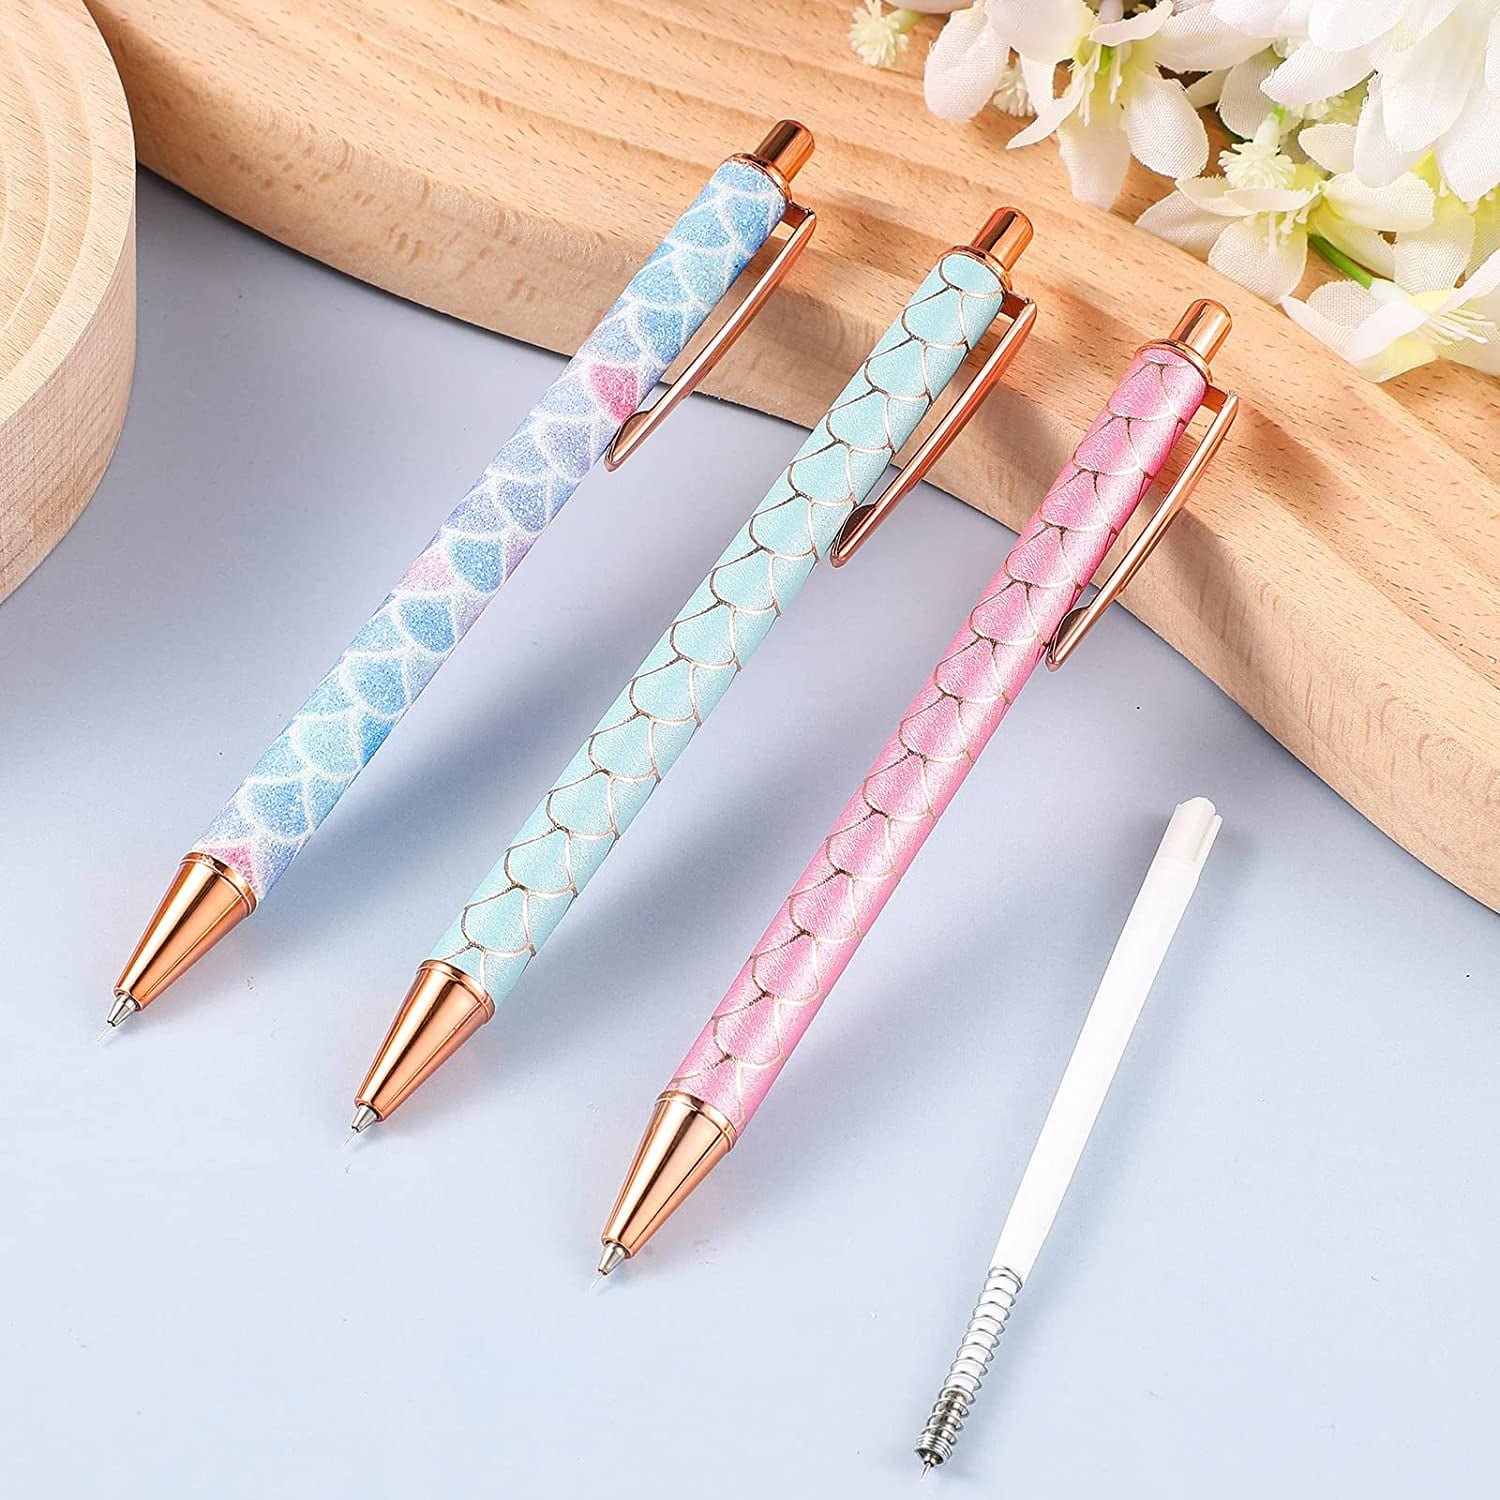 Vinyl Air Release Weeding Pen Perfect For Easy Pen Stand Craft And Vinyl  Projecting Model 001 From Blanksub_006store, $1.82